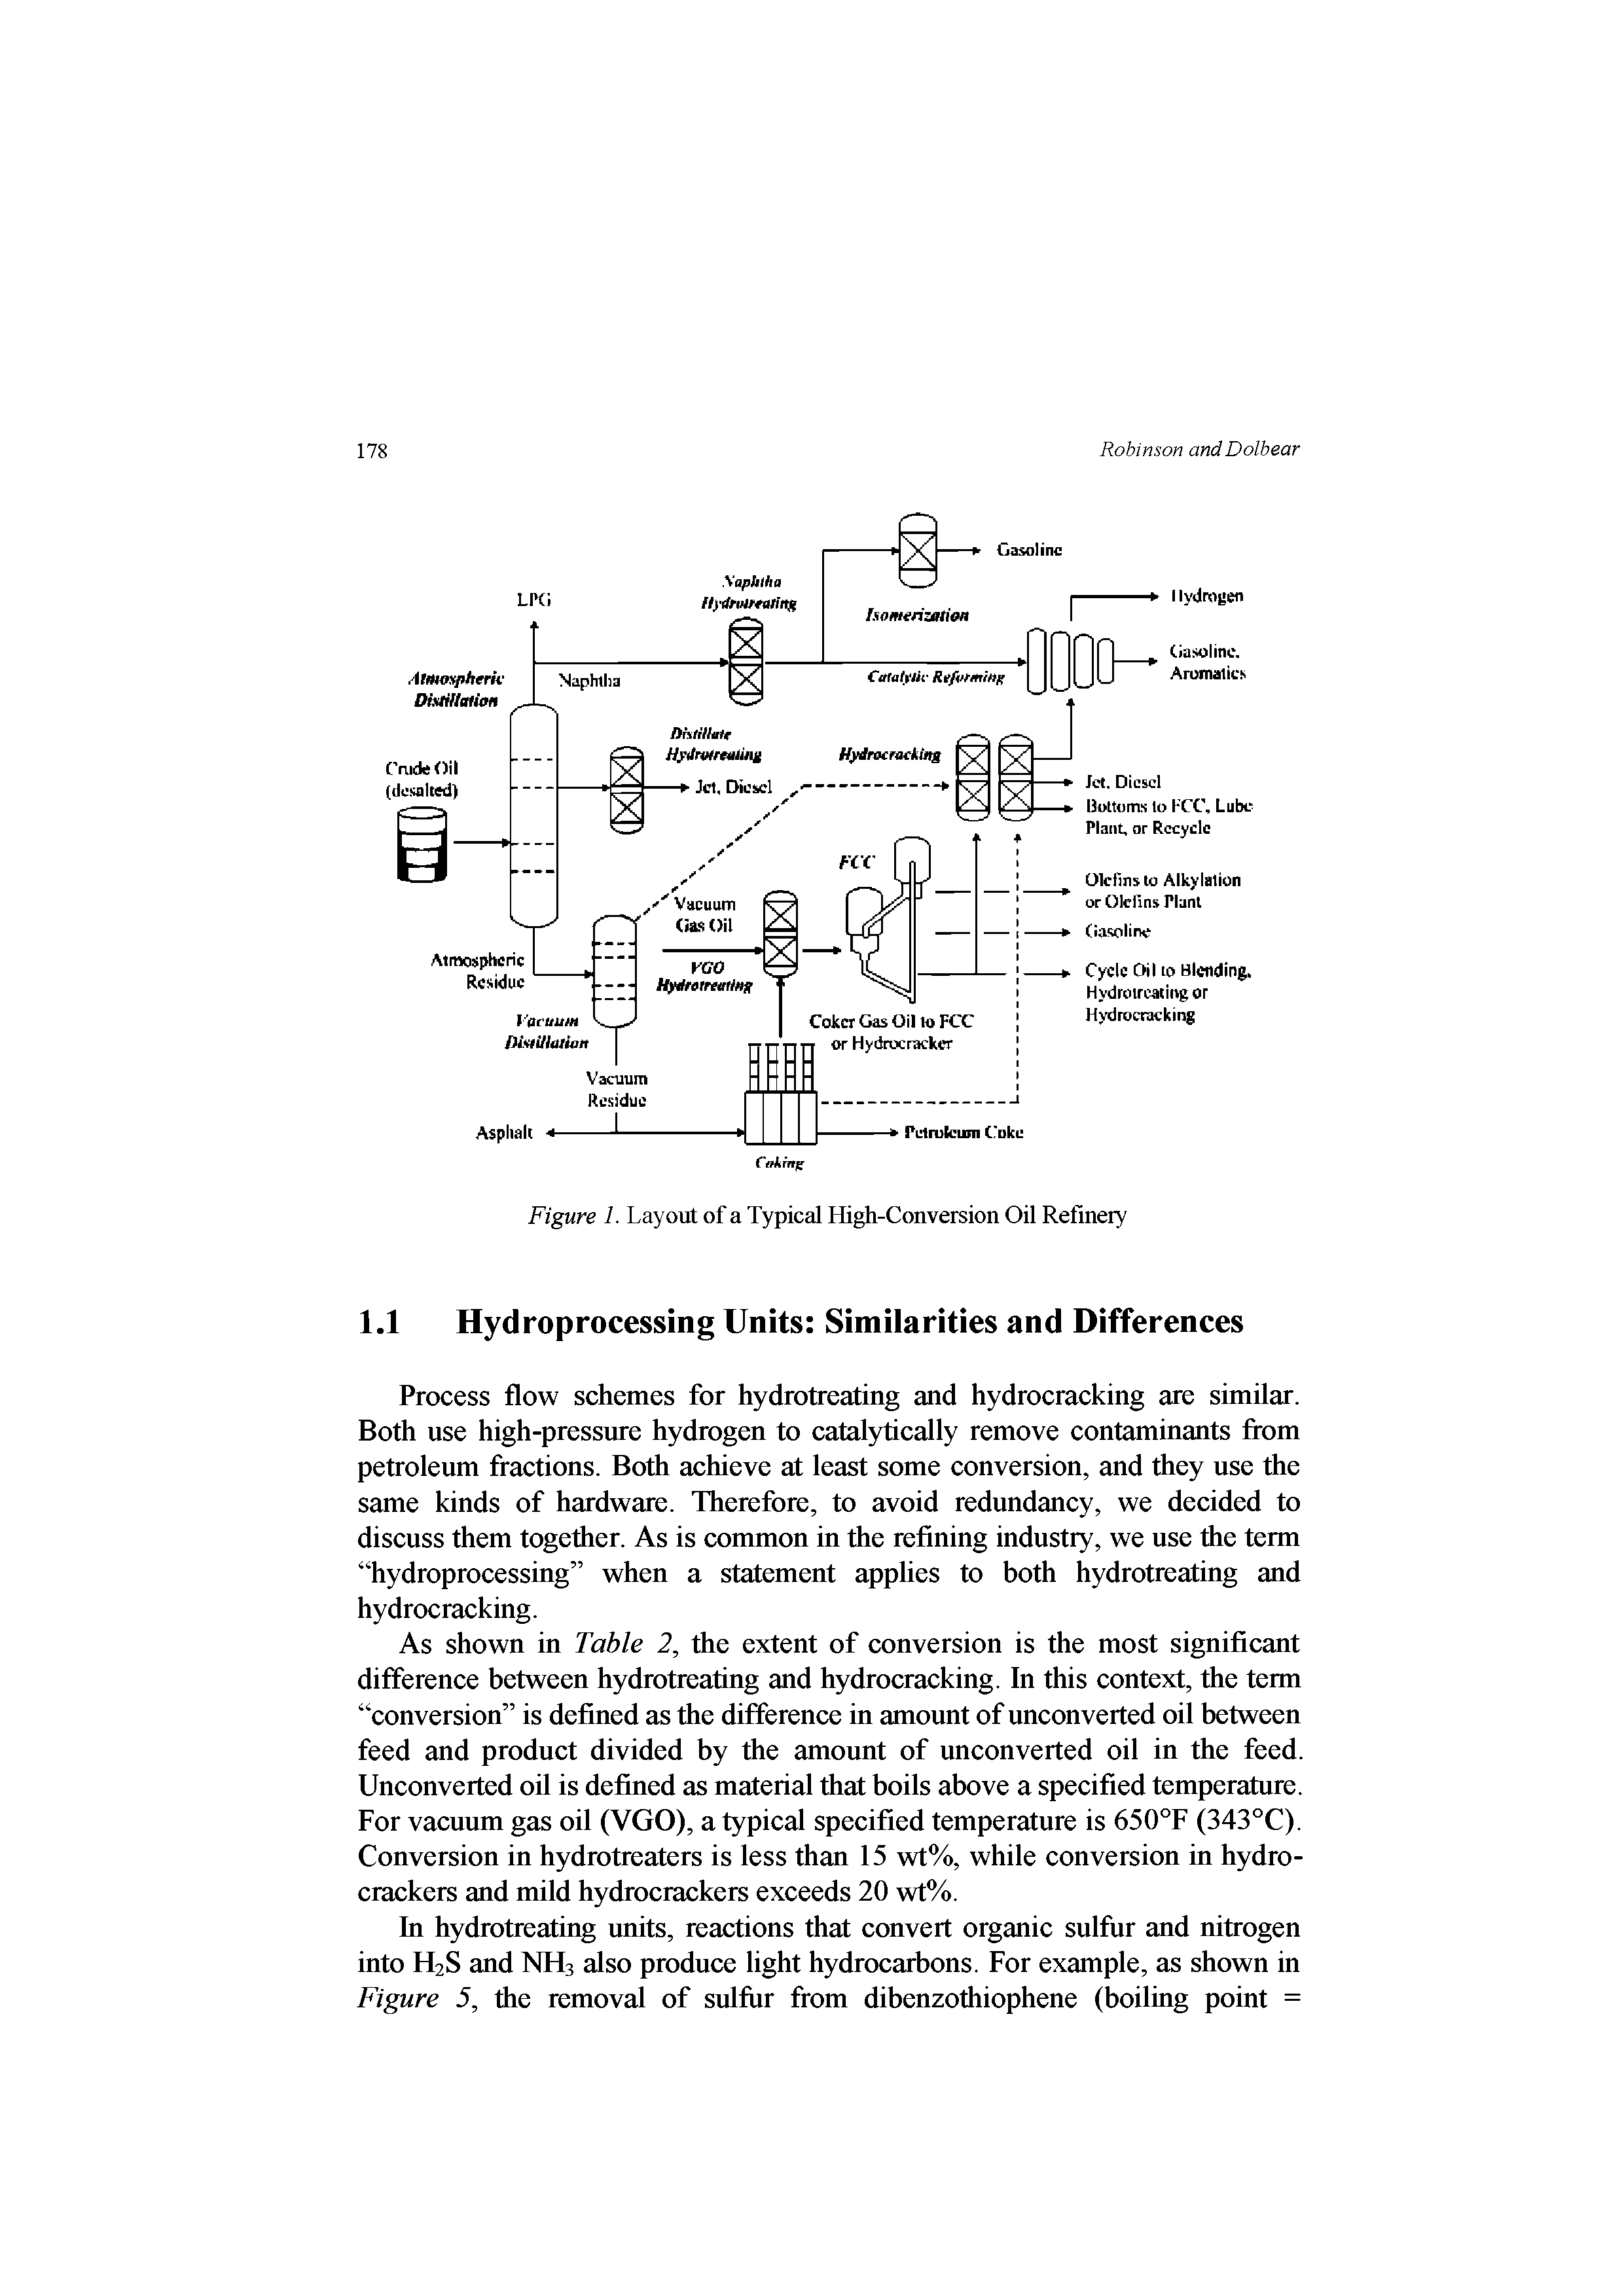 Figure 1. Layout of a Typical High-Conversion Oil Refinery...